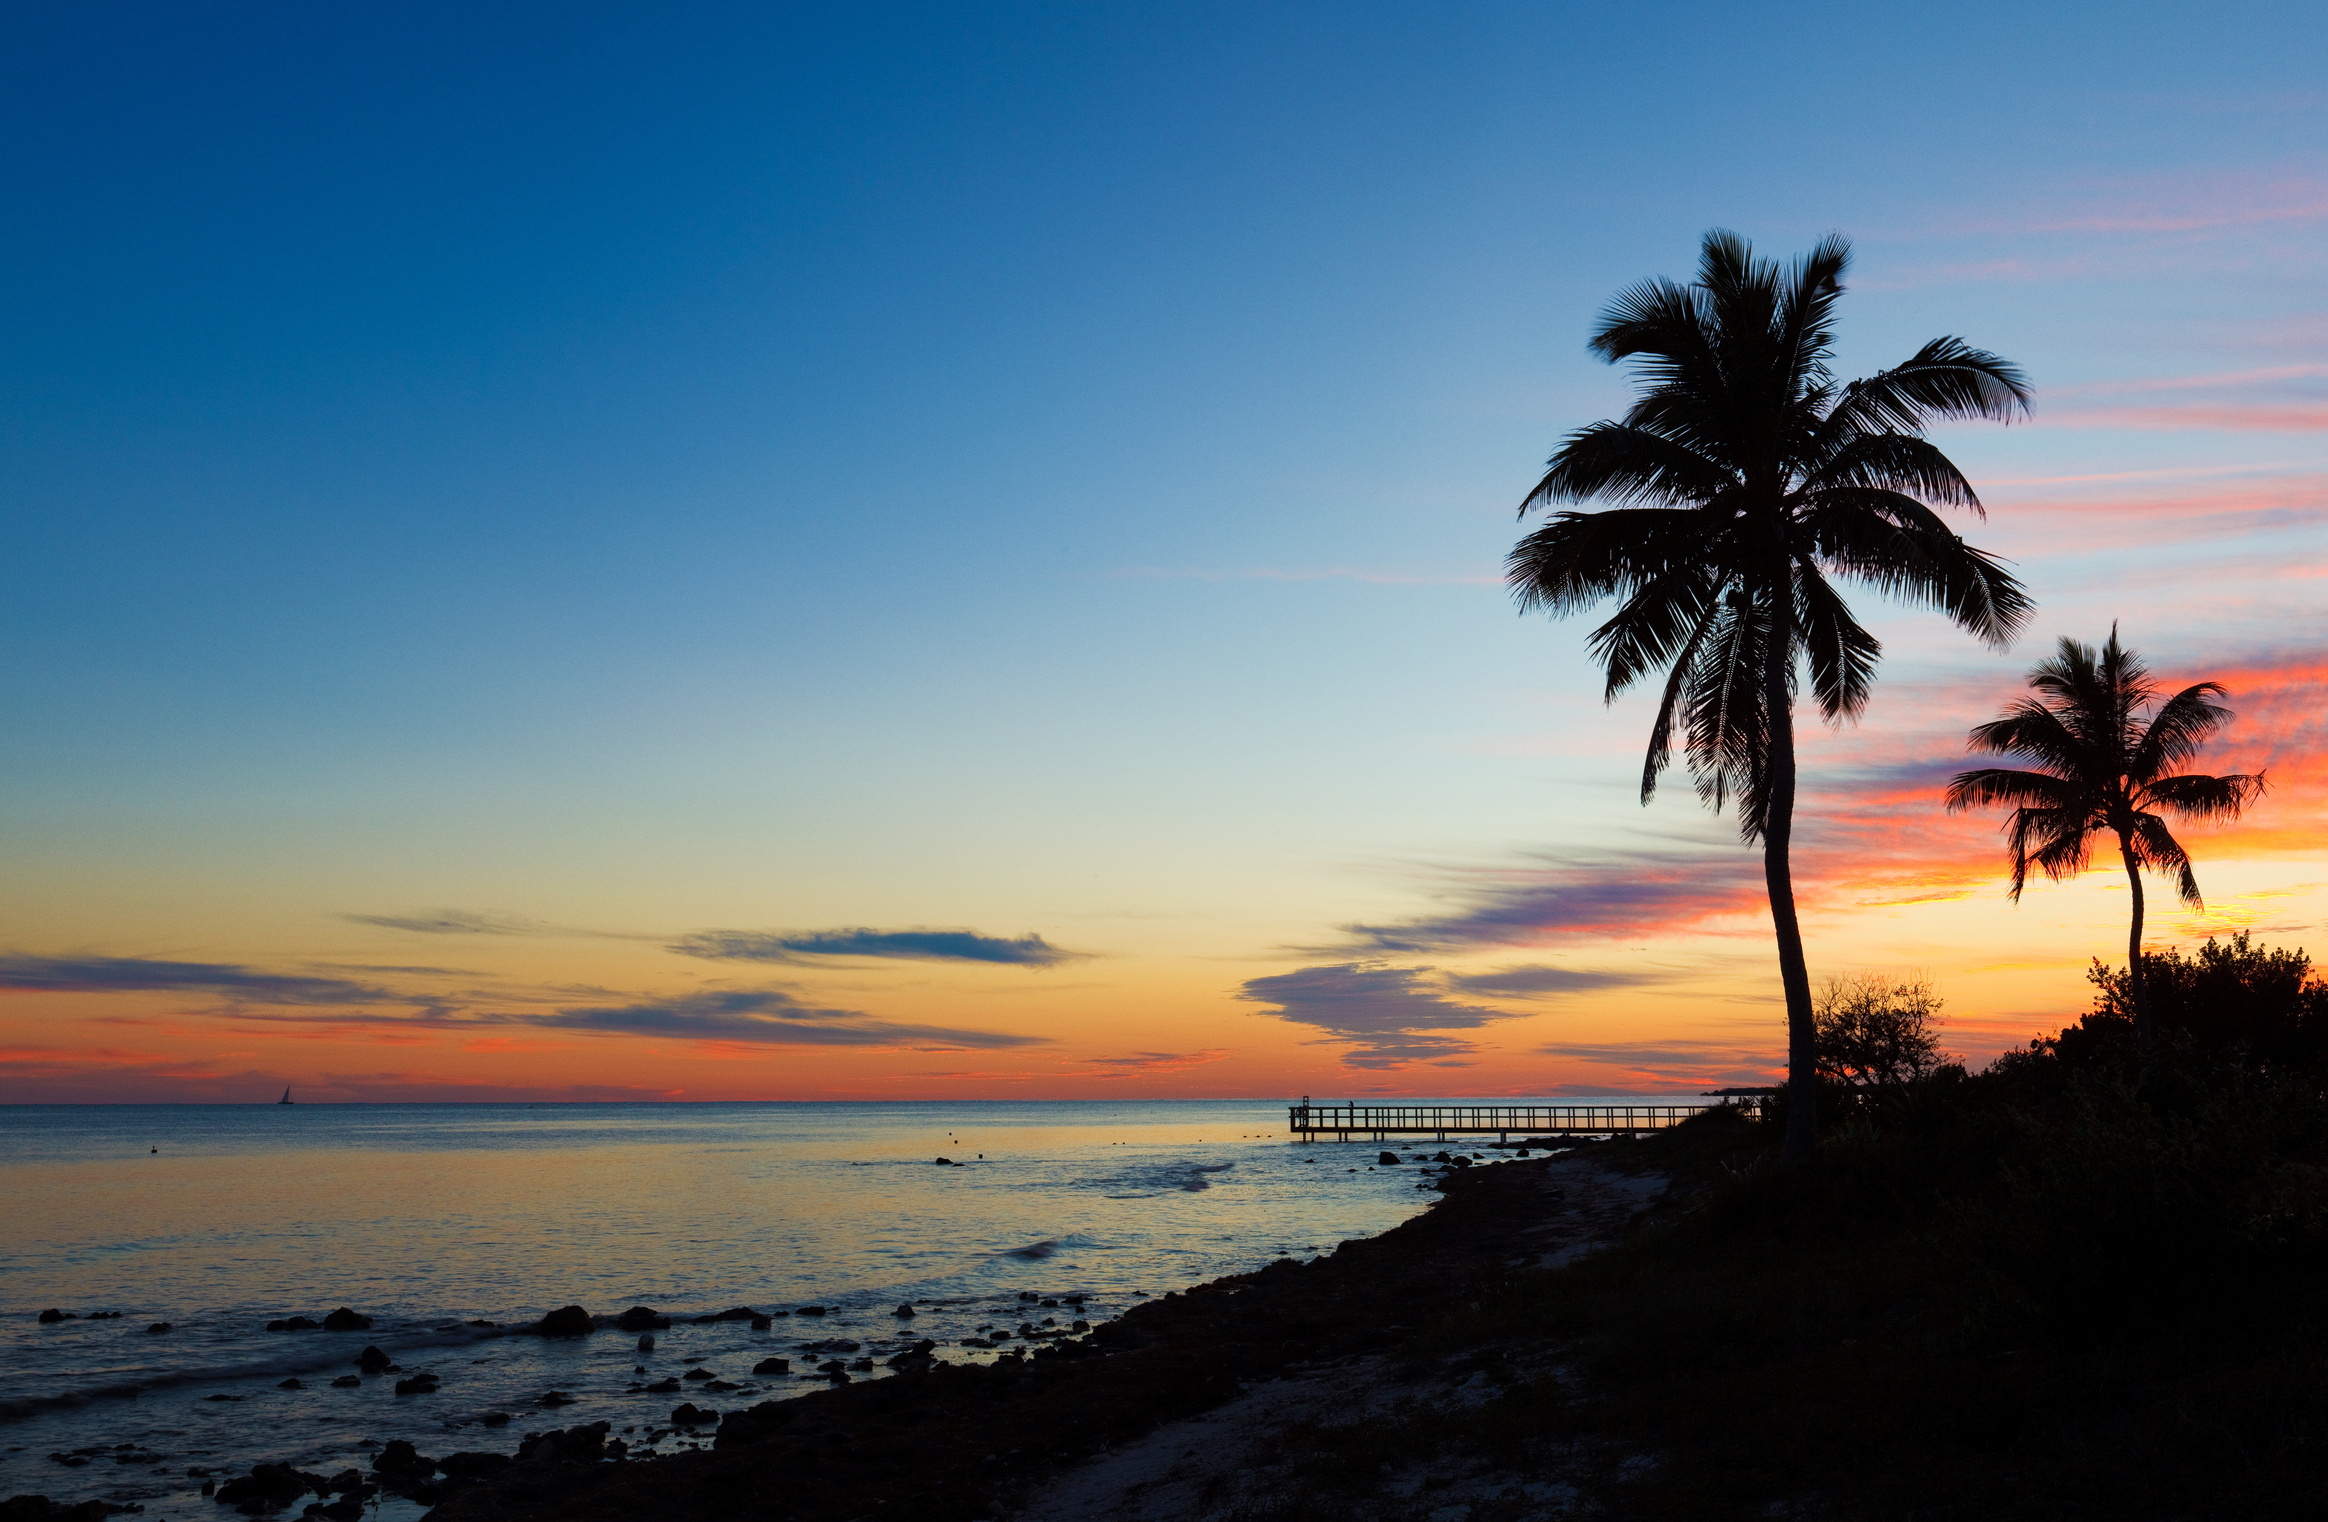 small pier and palm trees silhouettes at sunset